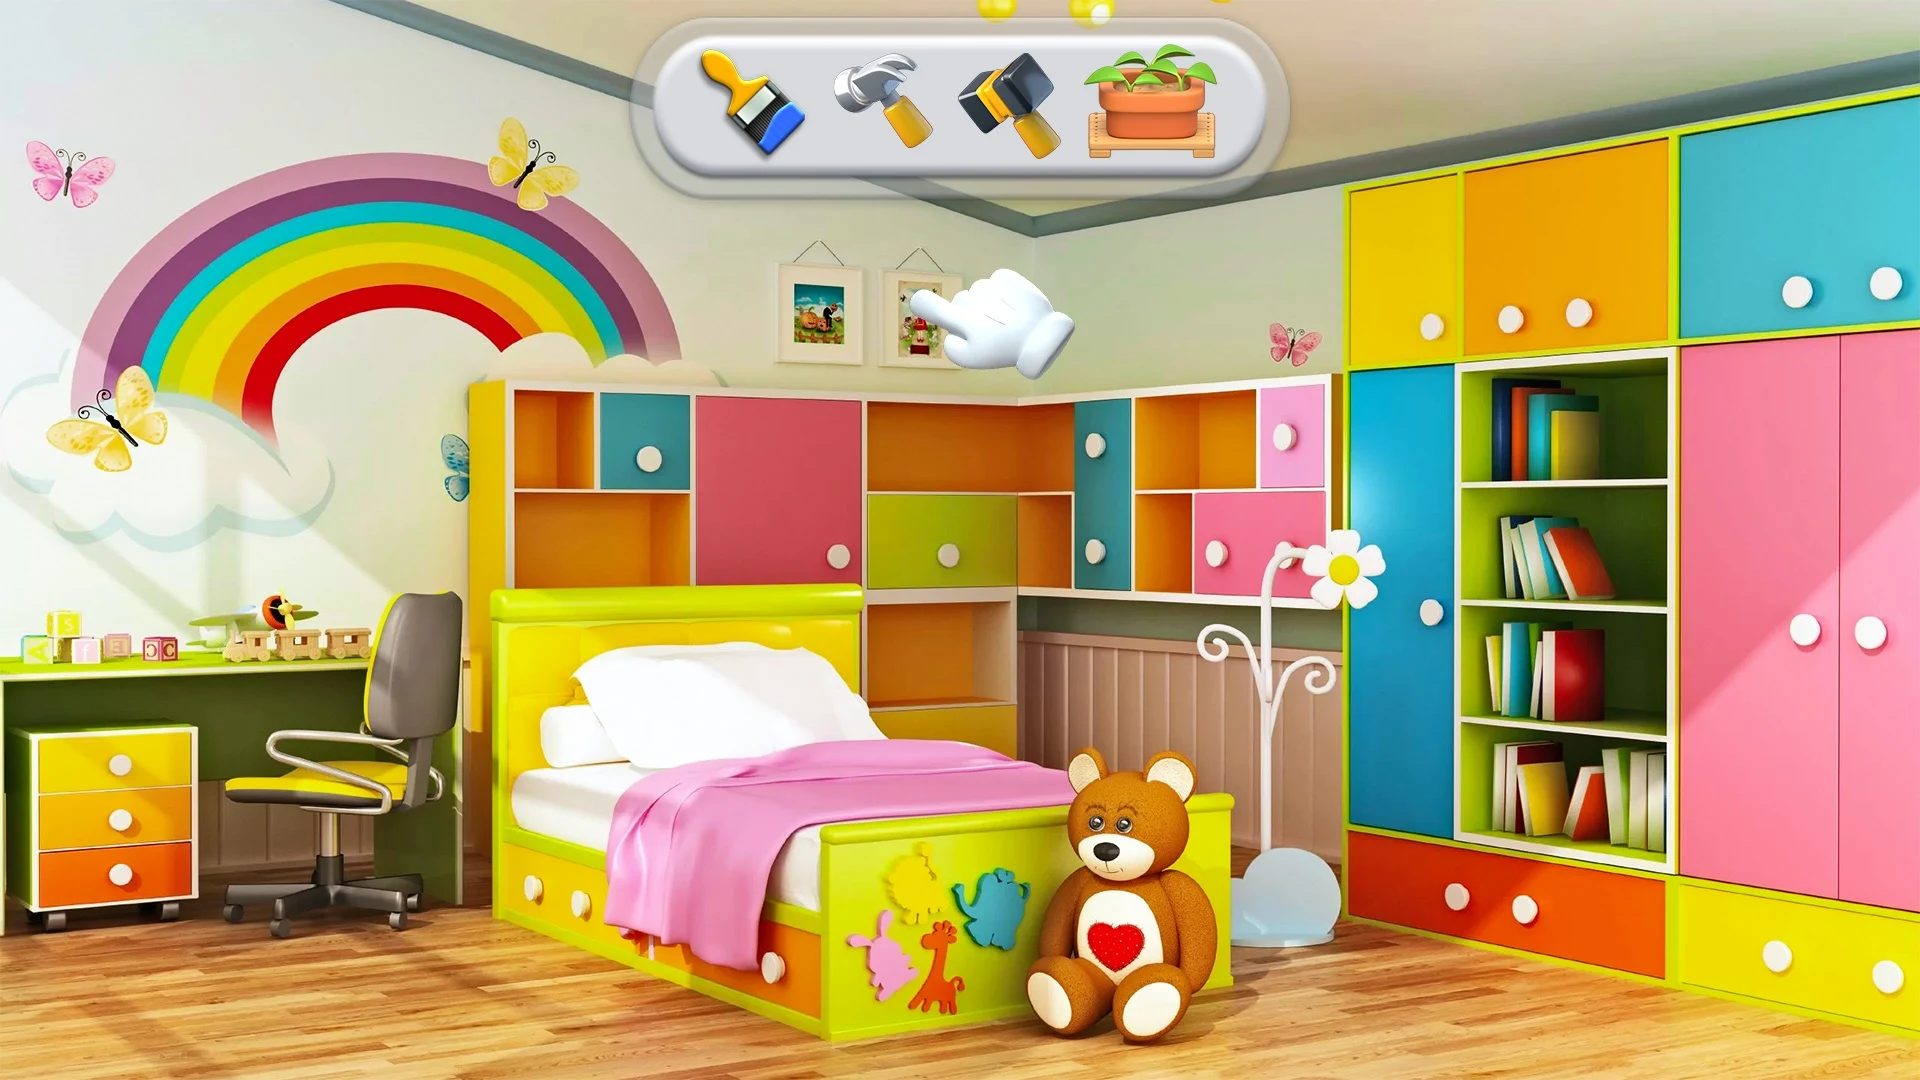 Kids Home Design : With puzzle